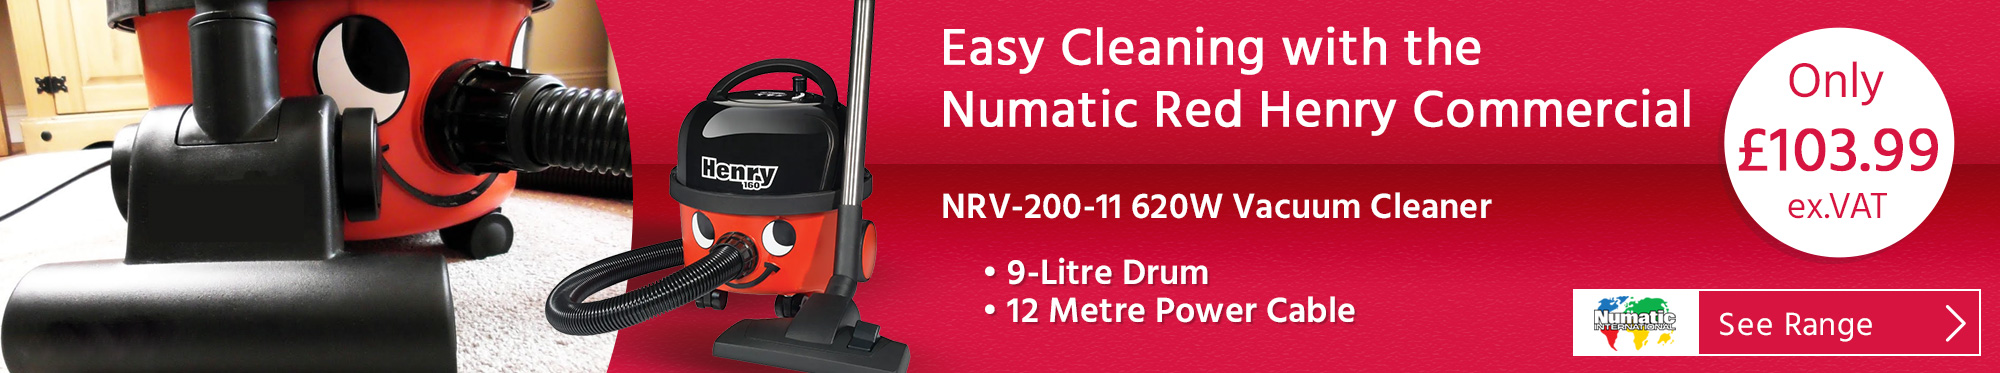 Easy Cleaning With The Numatic Red Henry